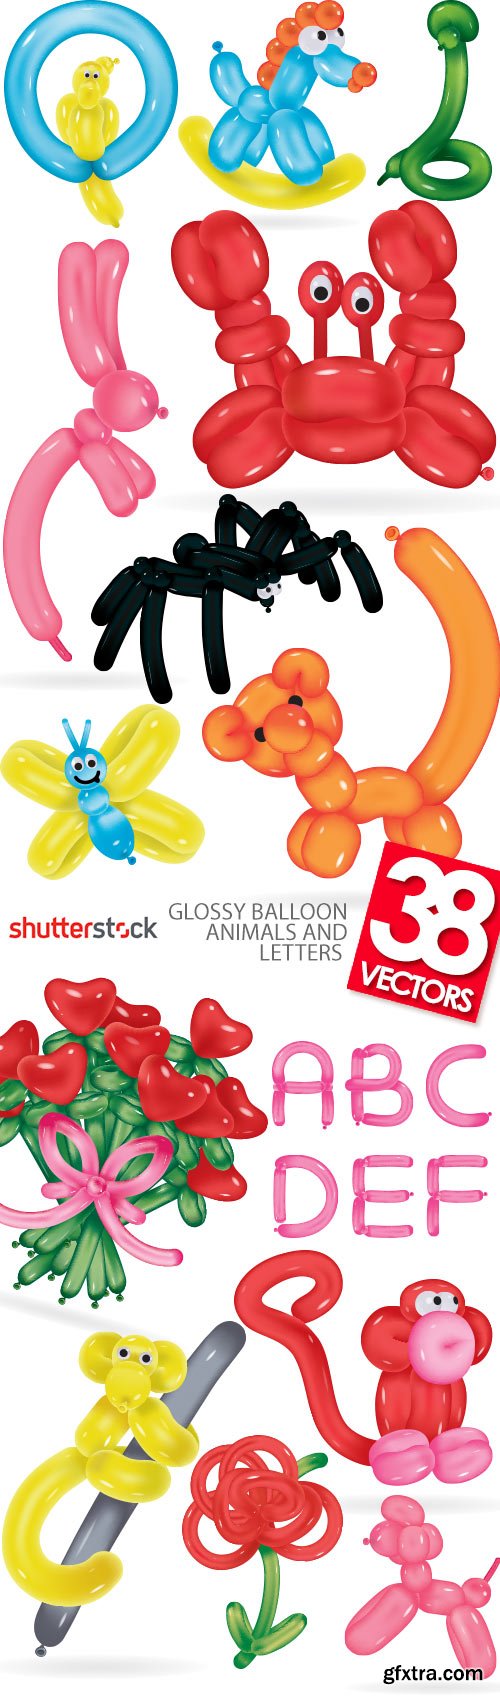 Glossy Balloon Animals and Letters 38xEPS